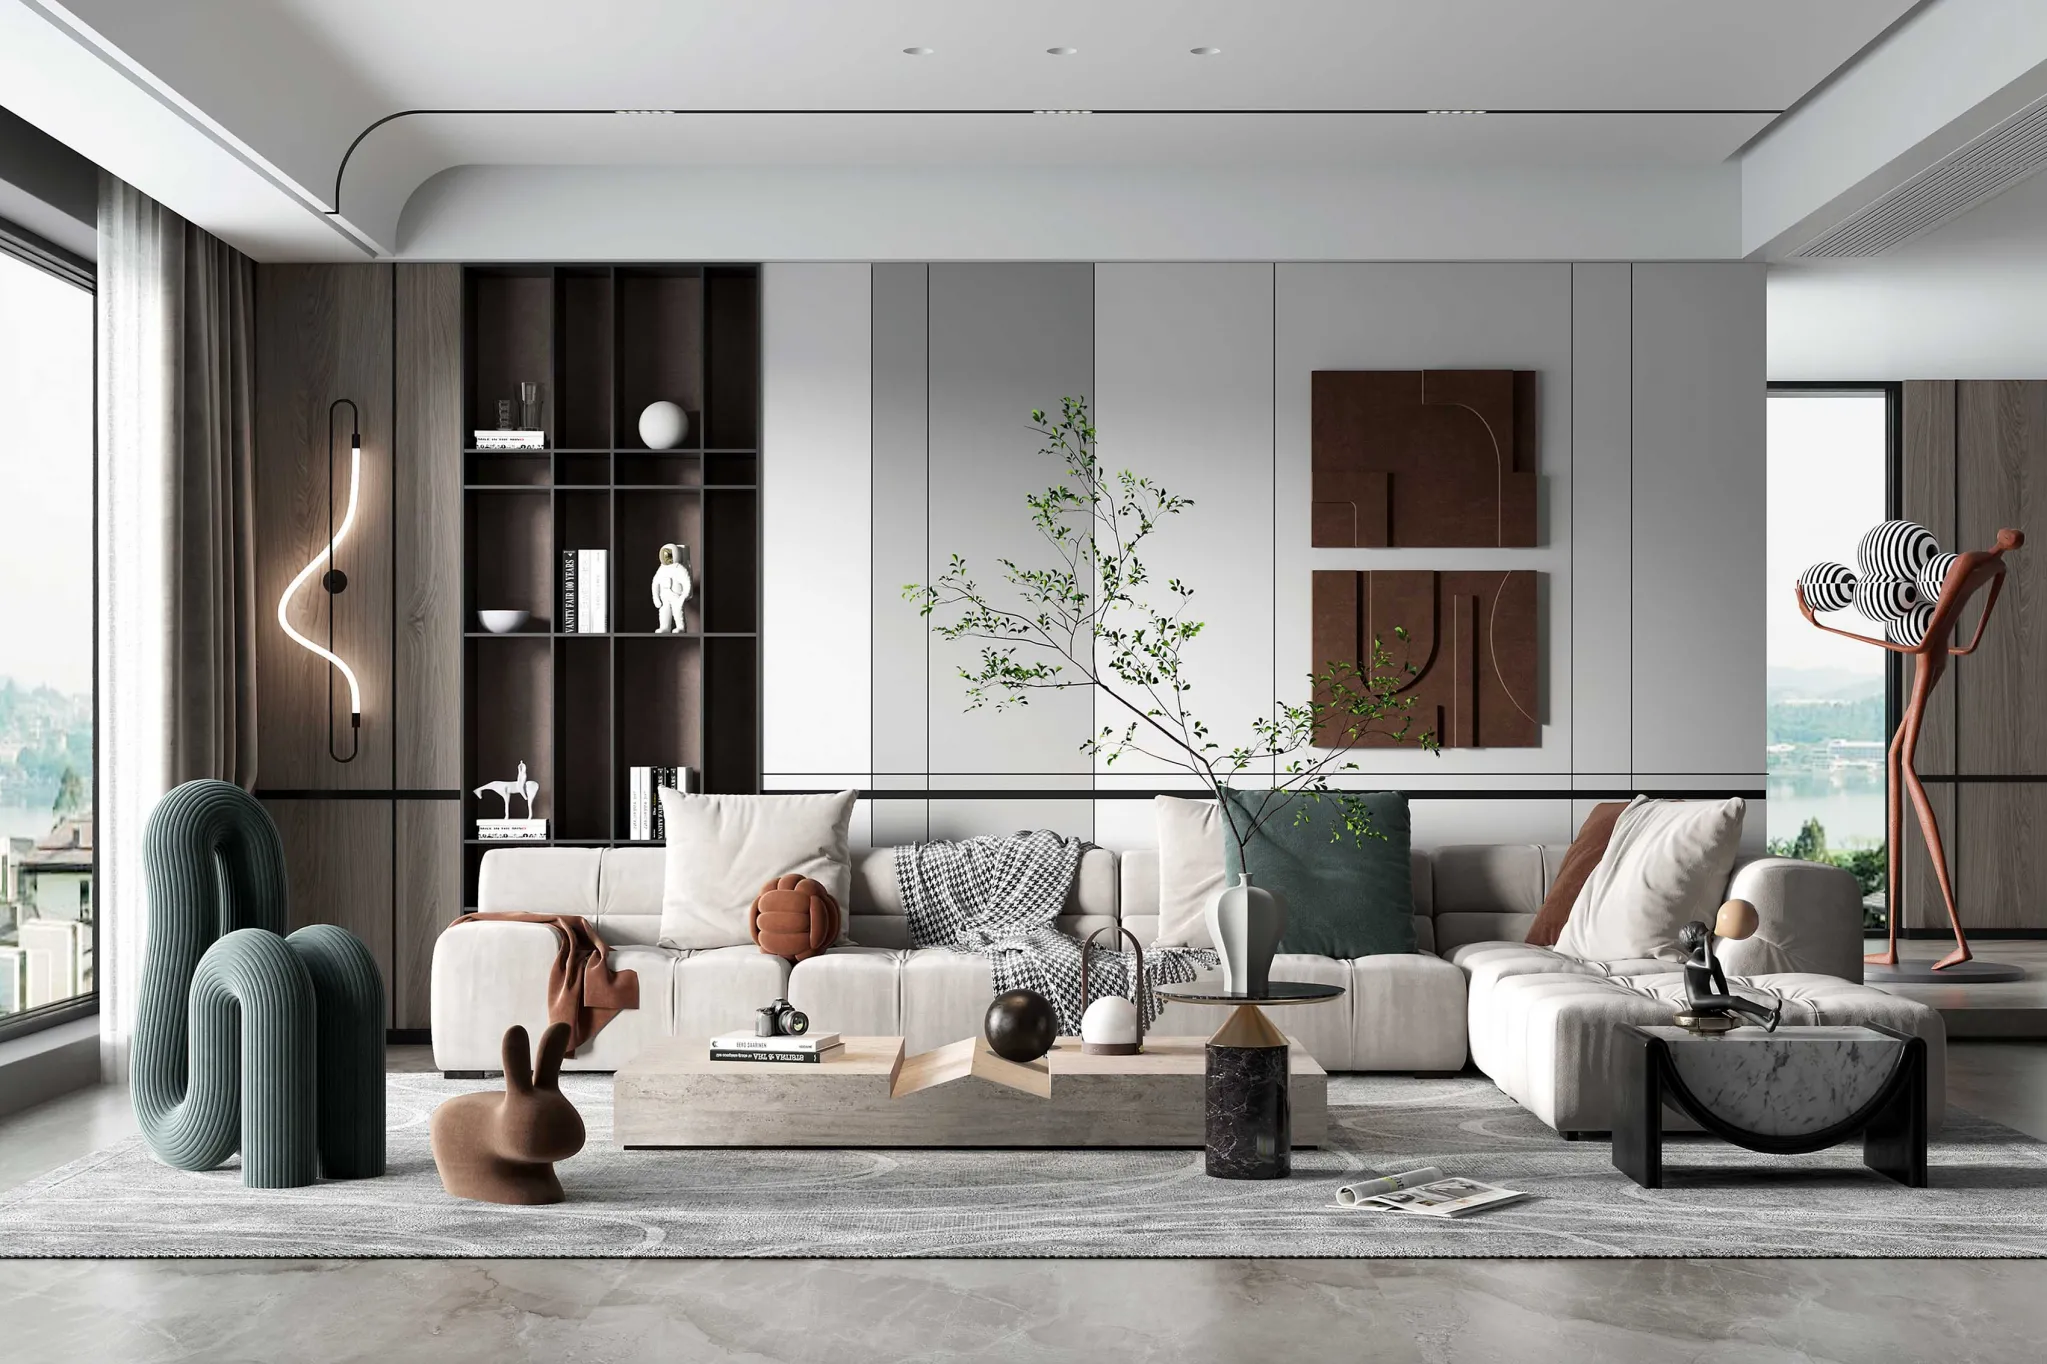 HOUSE SPACE 3D SCENES – LIVING ROOM – 0171